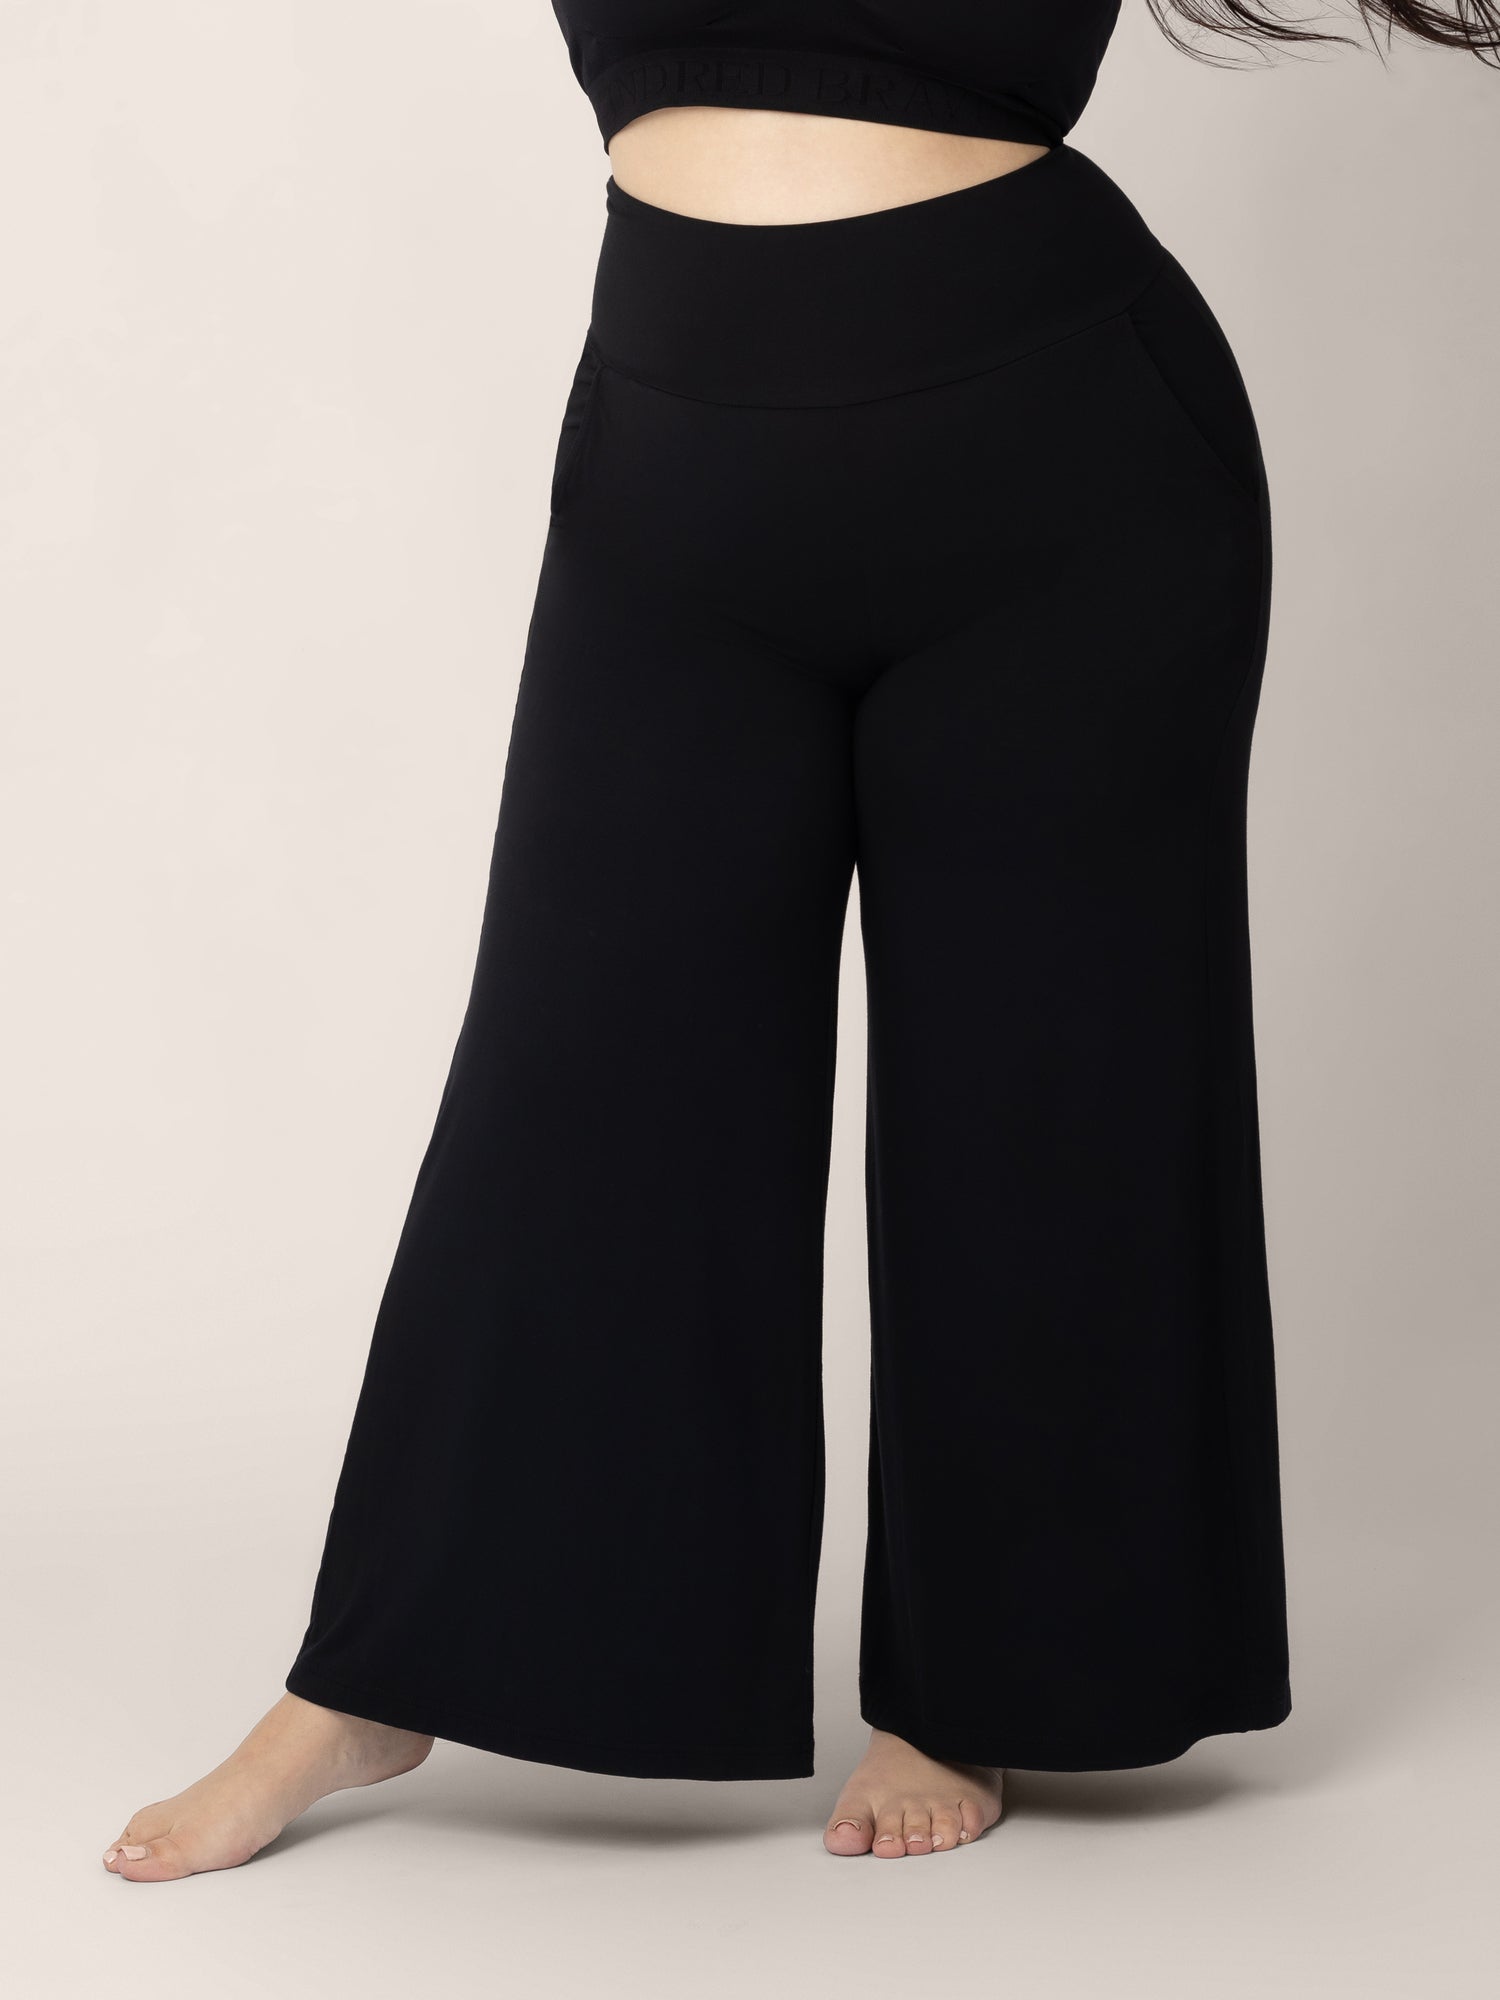 Bottom half of a model wearing the Bamboo Wide Leg Maternity & Postpartum Lounge Pant in black. @model_info:Rachel is 5'6" and wearing a Large.